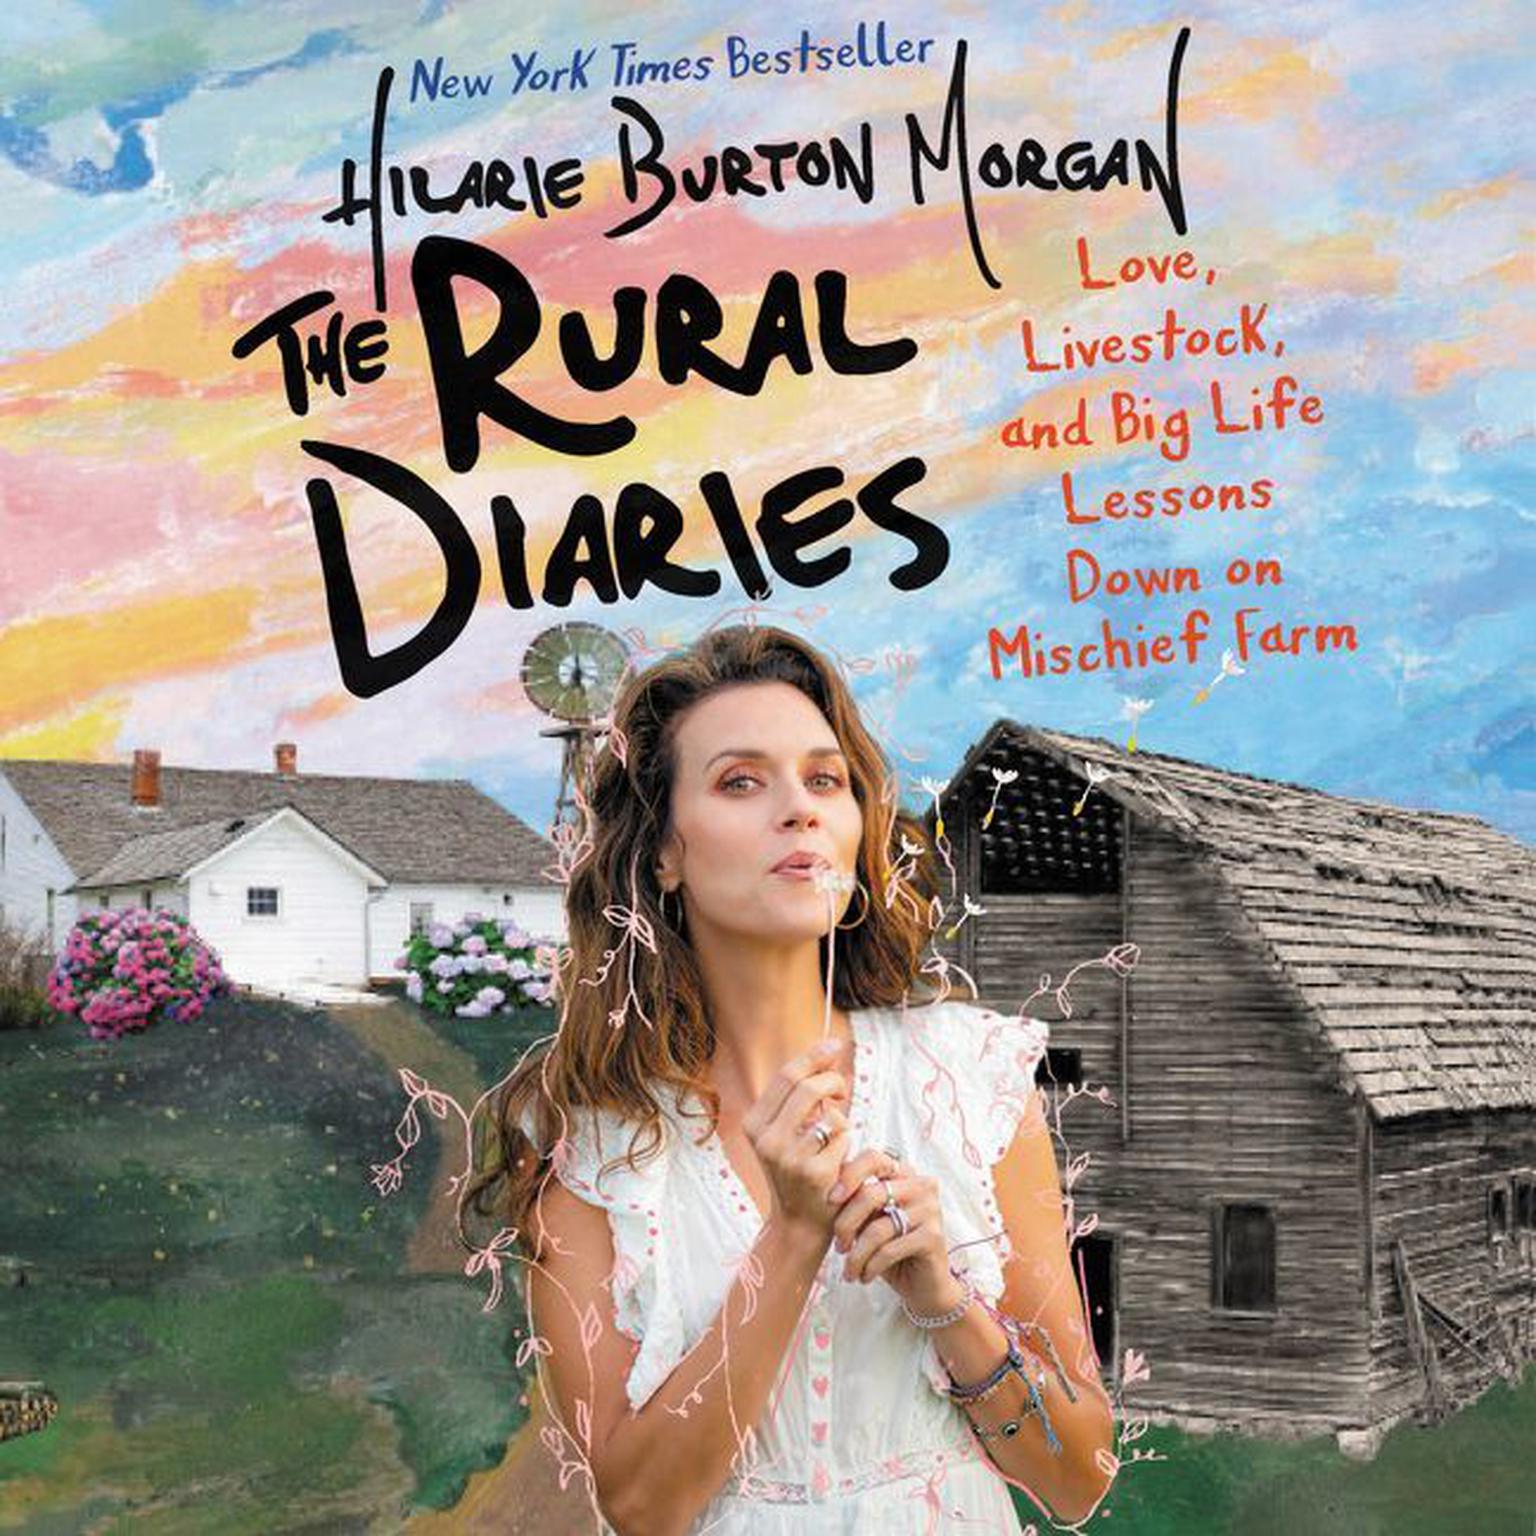 The Rural Diaries: Love, Livestock, and Big Life Lessons Down on Mischief Farm Audiobook, by Hilarie Burton